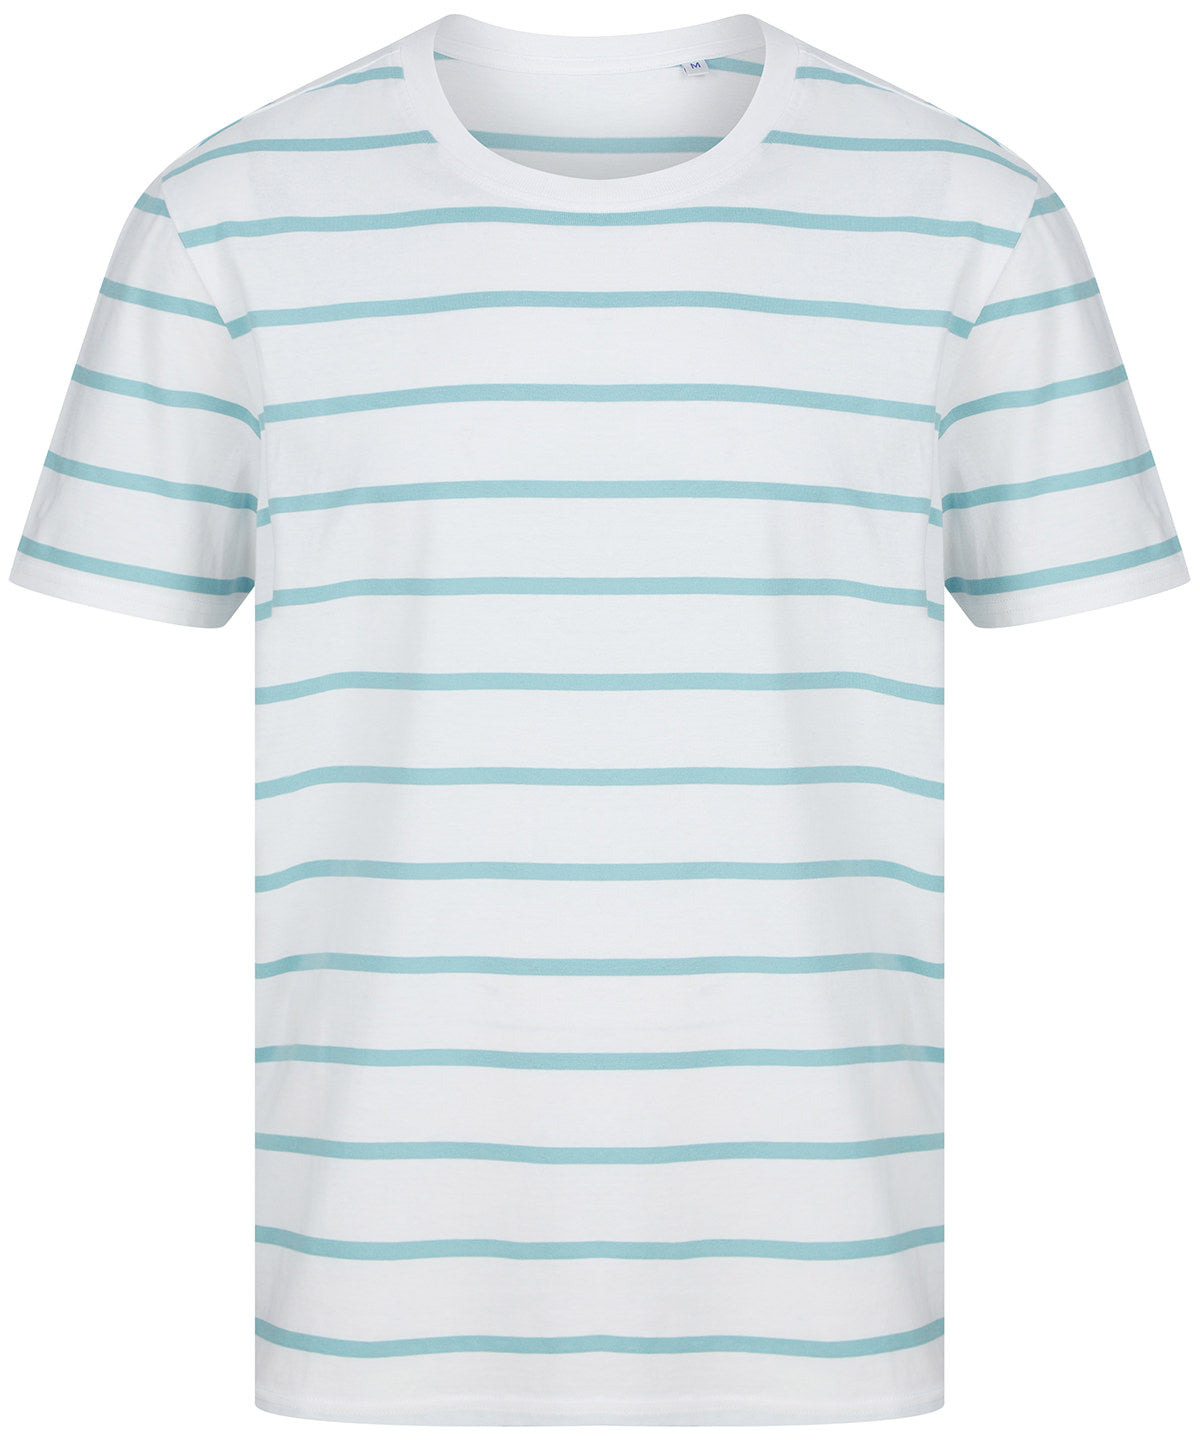 Personalised T-Shirts - Stripes Front Row Striped T